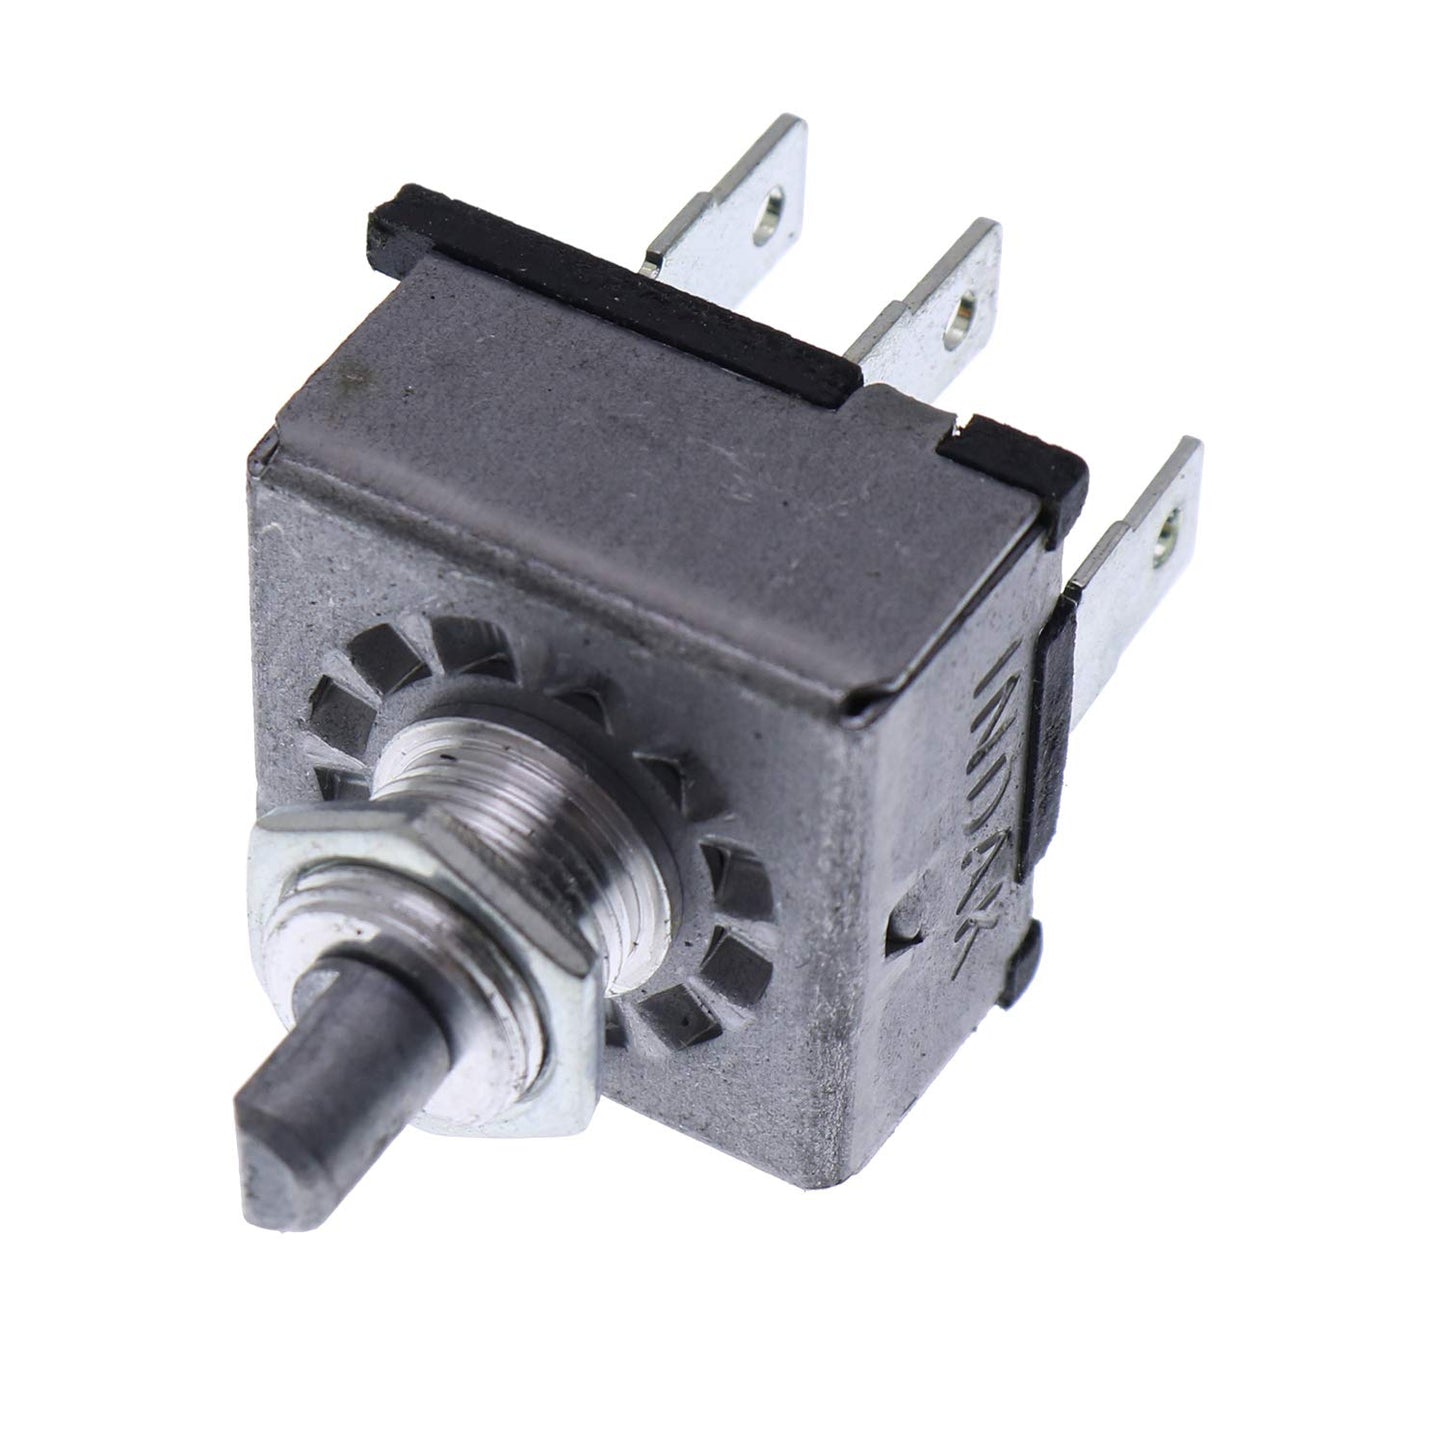 6675176 Blower Motor Switch Compatible With bobcat Excavators 319 320 321 322 323 324